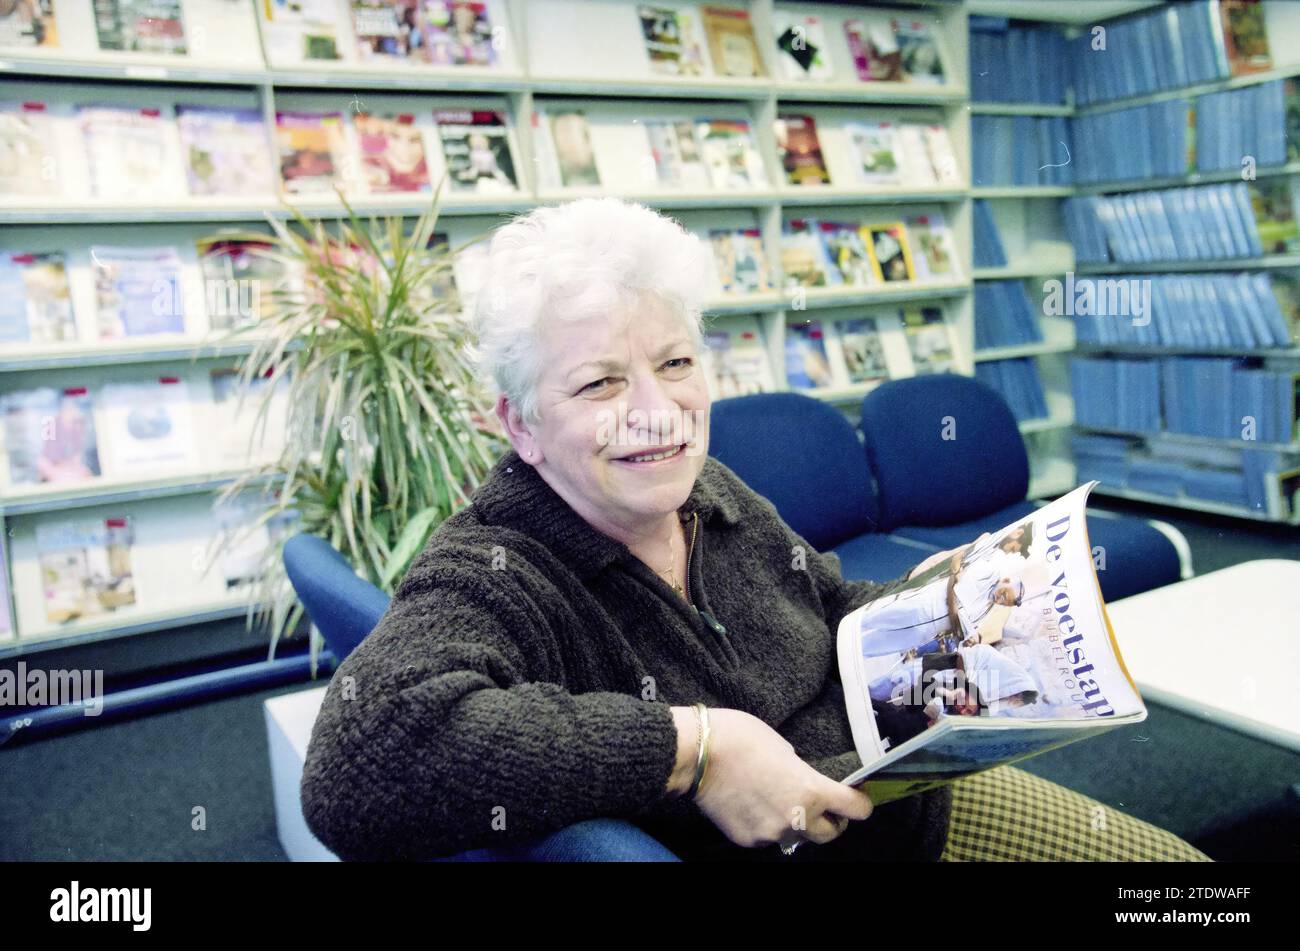 Mrs. de Wit, library in Heemstede, Heemstede, The Netherlands, 26-01-2000, Whizgle News from the Past, Tailored for the Future. Explore historical narratives, Dutch The Netherlands agency image with a modern perspective, bridging the gap between yesterday's events and tomorrow's insights. A timeless journey shaping the stories that shape our future Stock Photo